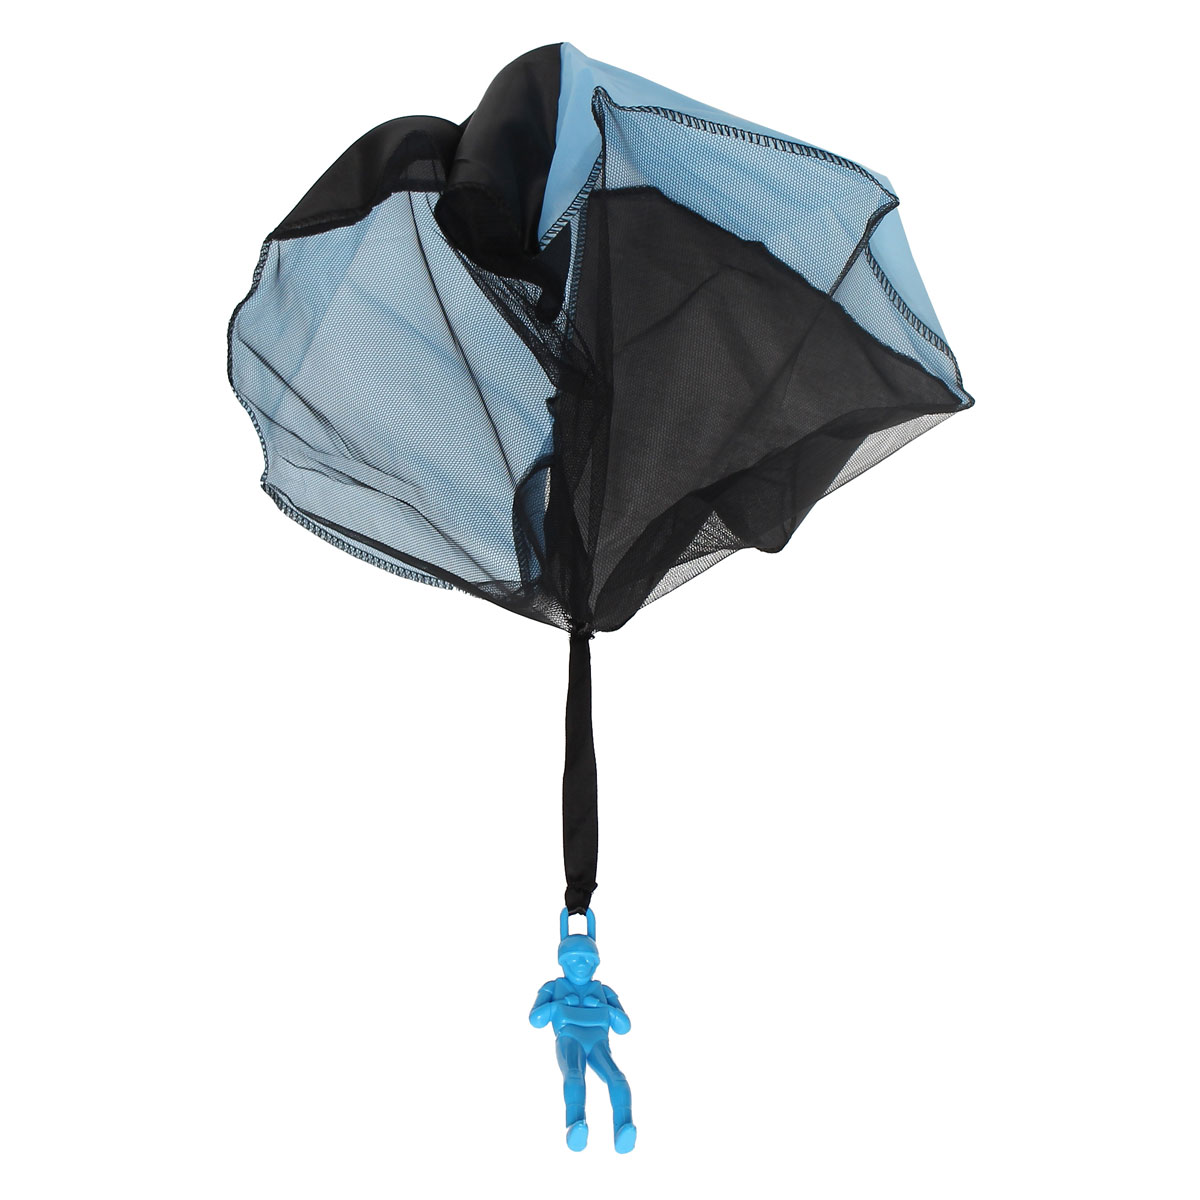 Kids-Hand-Throwing-Parachute-Kite-Outdoor-Play-Game-Toy-1021887-7